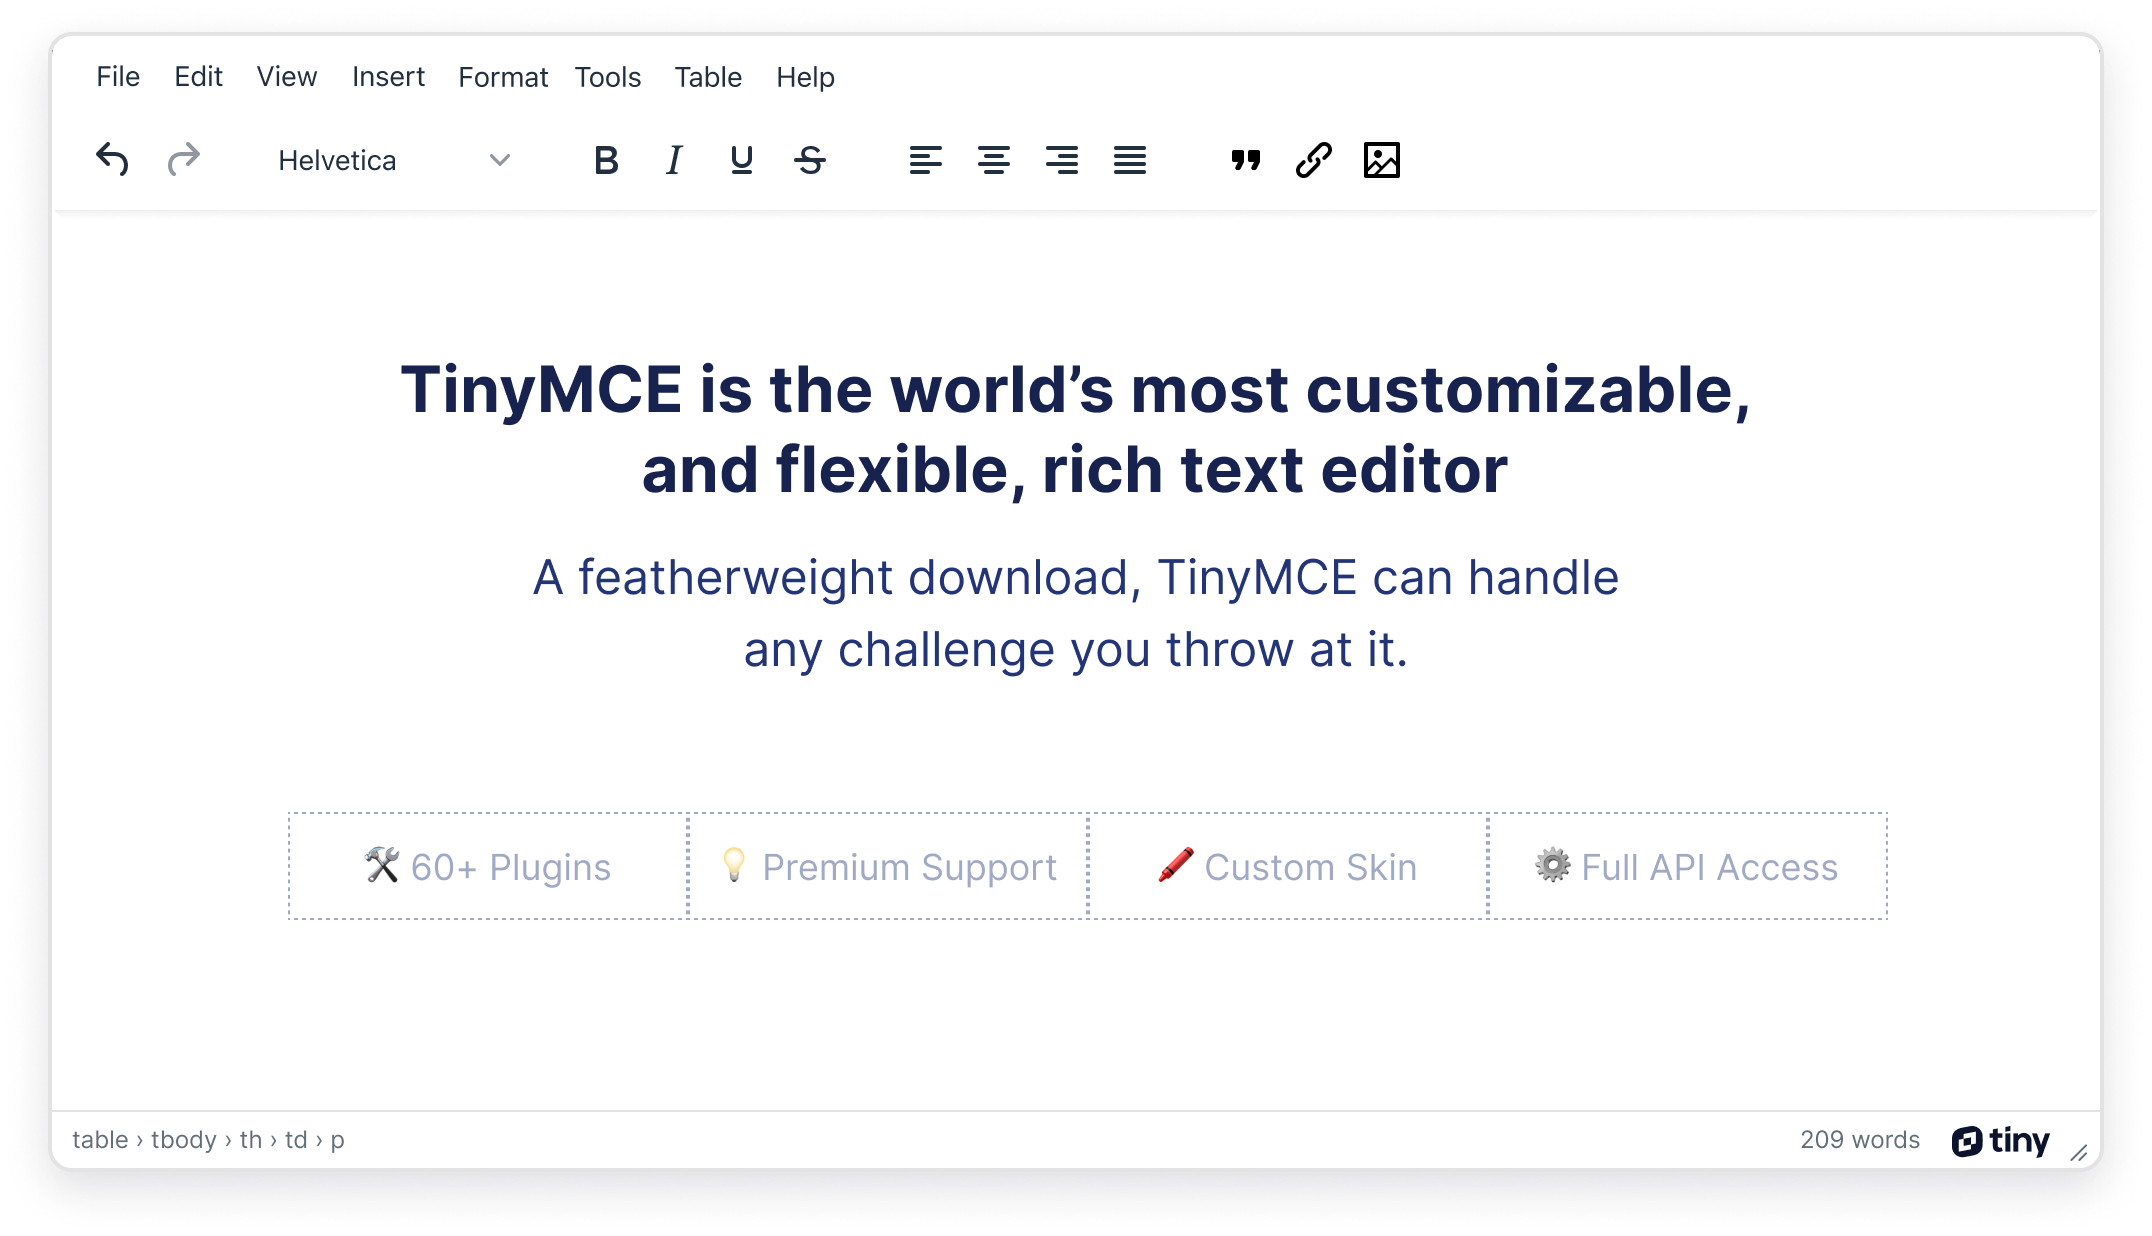 Image of TinyMCE with text 'POWERED BY TINY' at bottom right 